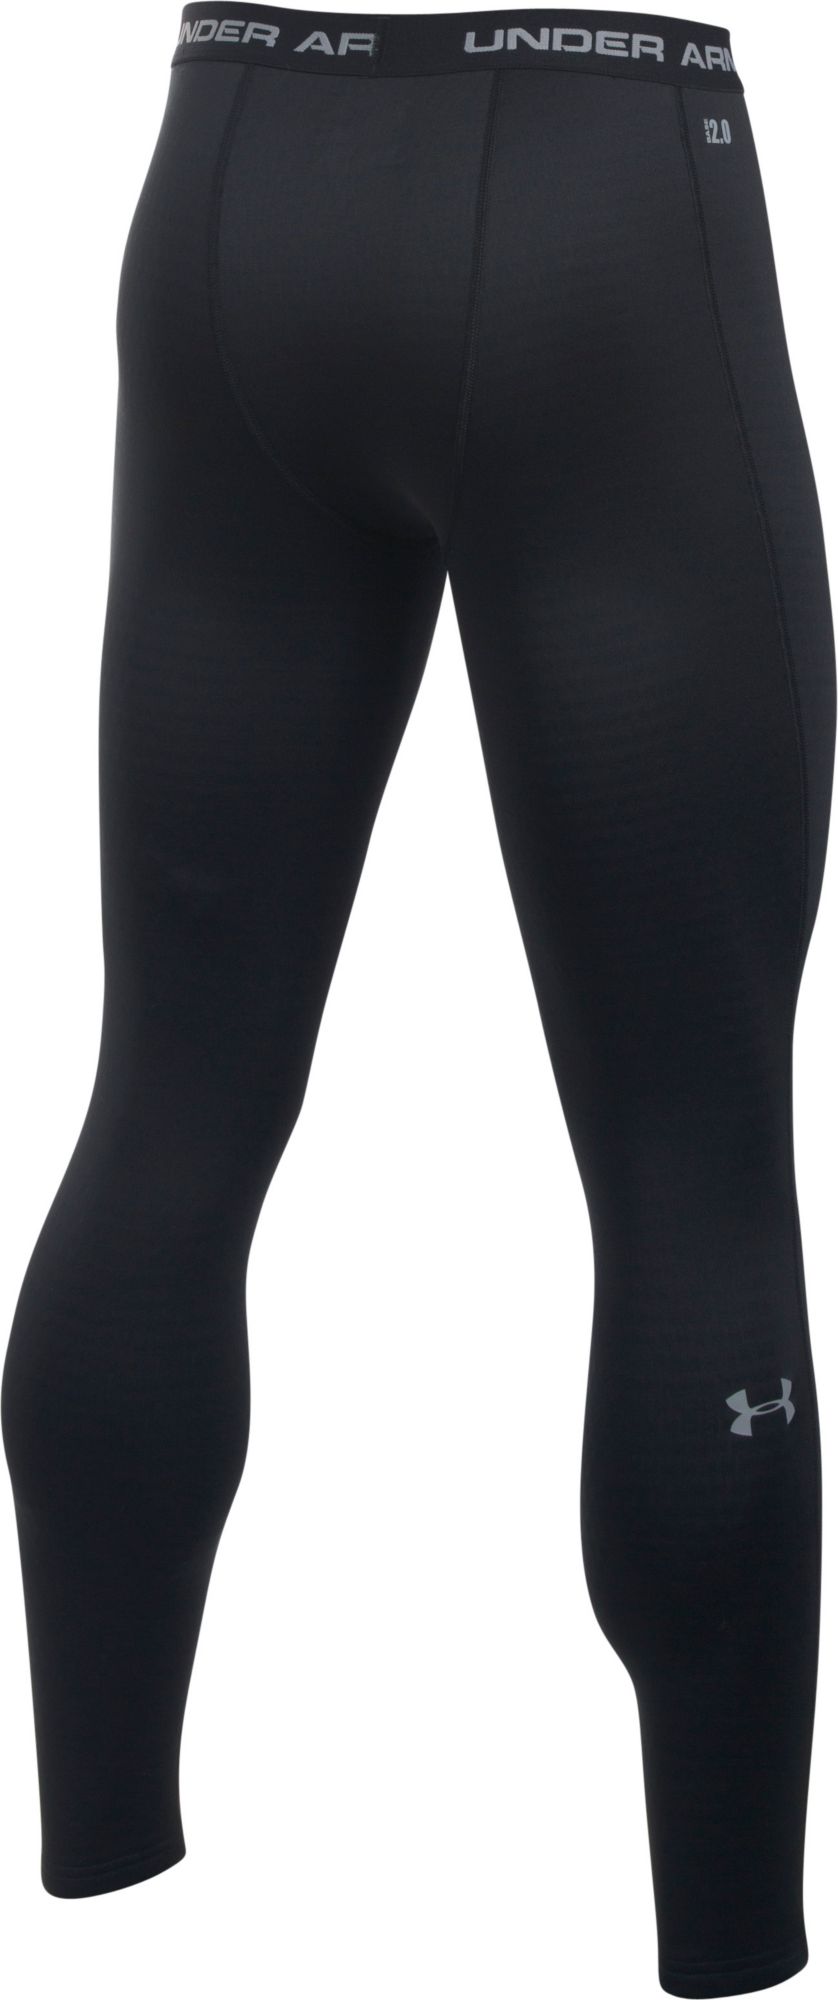 under armour men's thermal pants